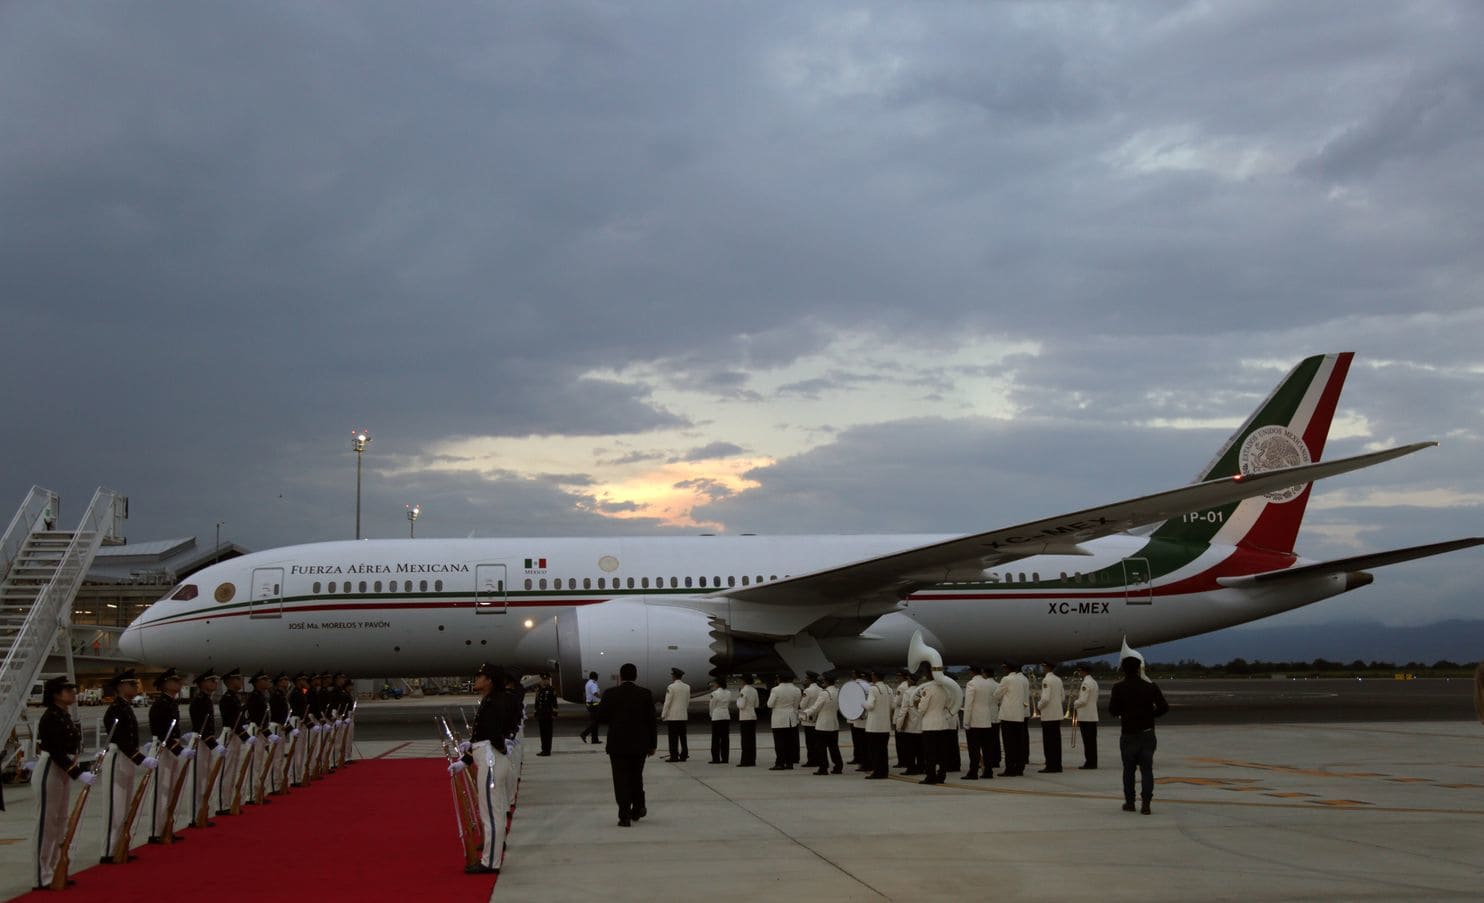 The man making an offer on Mexico’s presidential jet is a staunch advocate of the border wall